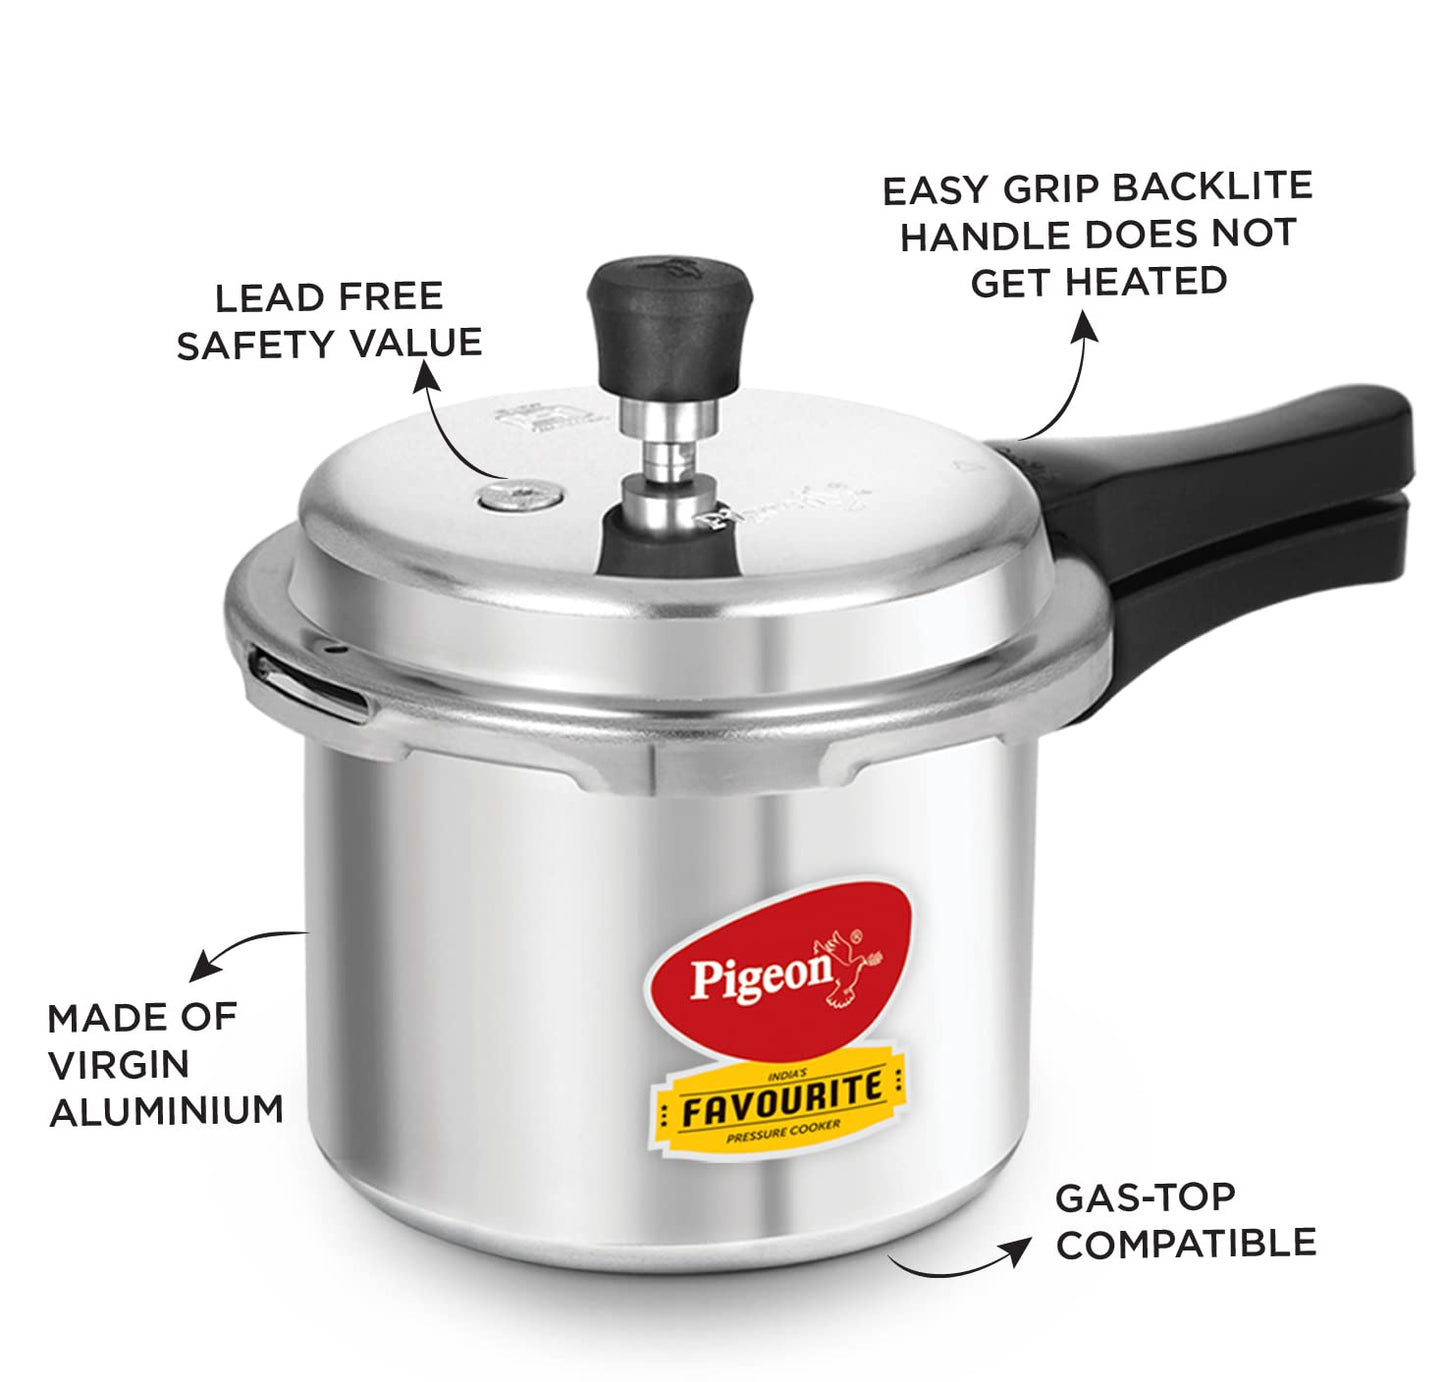 Pigeon by Stovekraft Favourite Outer Lid Non Induction Aluminium Pressure Cooker, 3 Litres, Silver